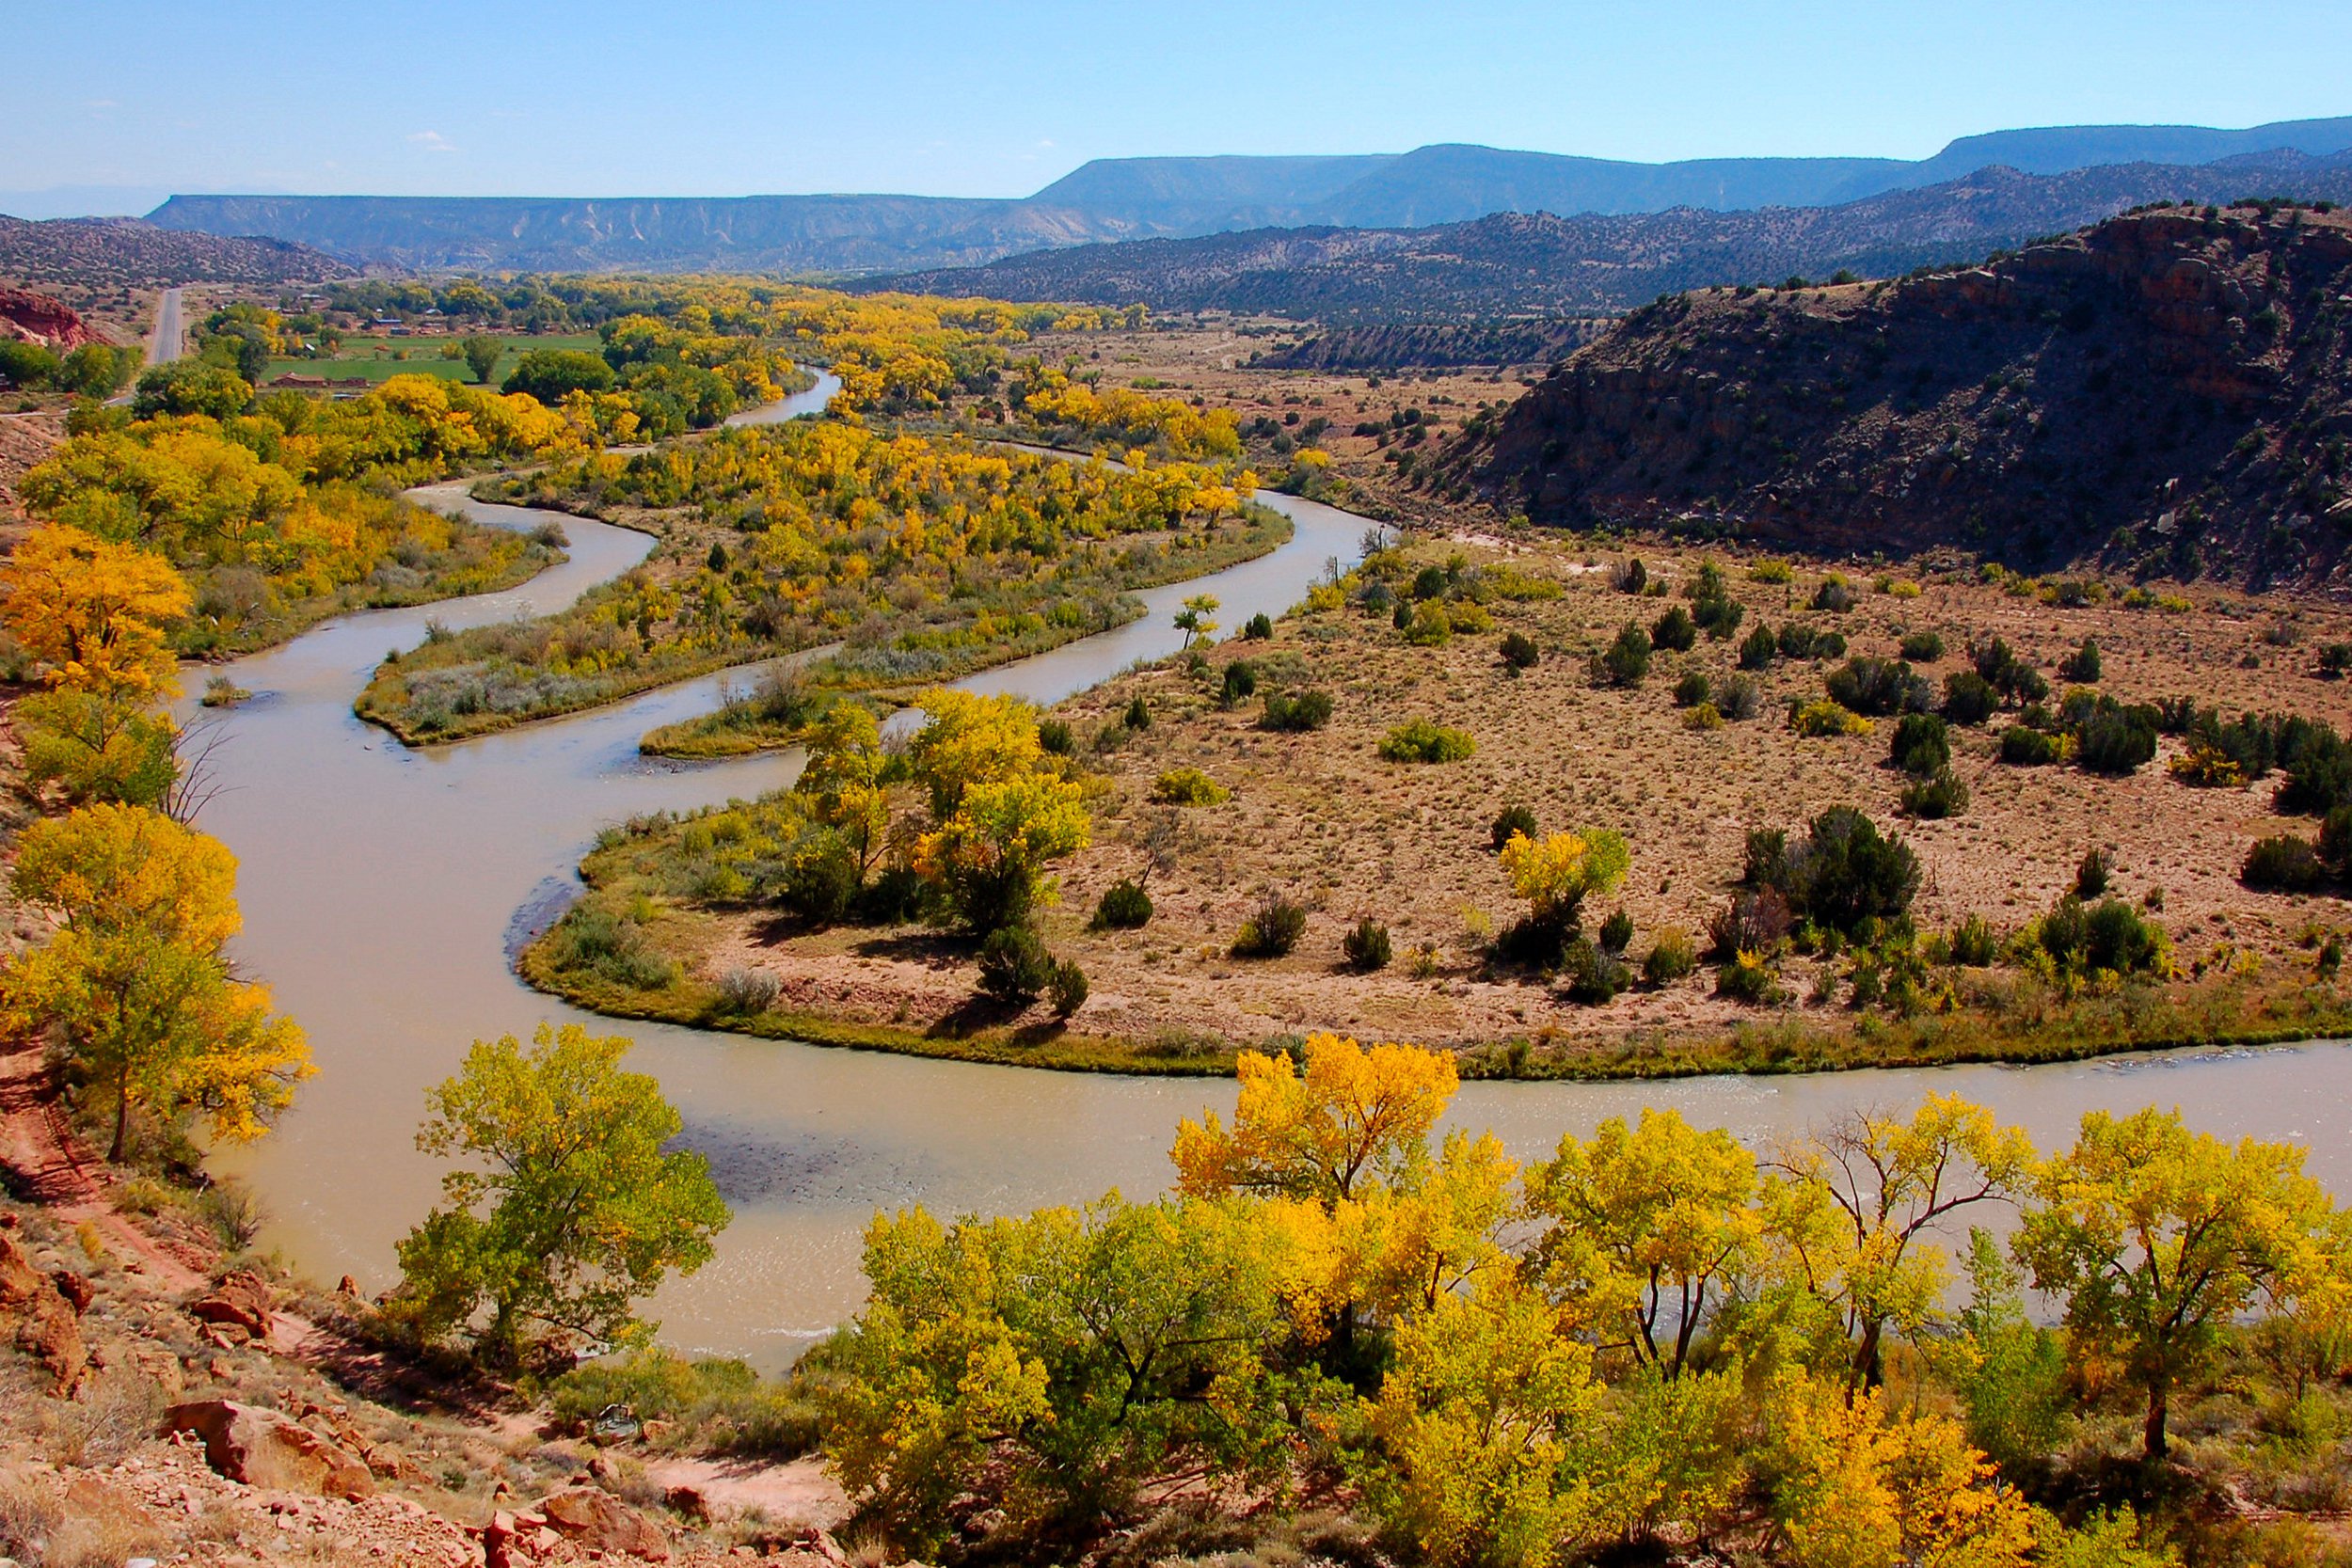 <p>Anglers are drawn to <a href="https://www.blm.gov/programs/recreation/permits-and-passes/lotteries-and-permit-systems/new-mexico">Chama River</a> not just for the brown trout, rainbow trout and Rio Grande cutthroat that call it home, but for the stunning Southwestern scenery they enjoy while they're waiting for bites. If you go there, plan well — the best time to fish is mid-morning. Weekend launch dates are managed using a lottery system. Pandemic guidelines are still in effect, but vaccinated individuals can generally go maskless. </p>